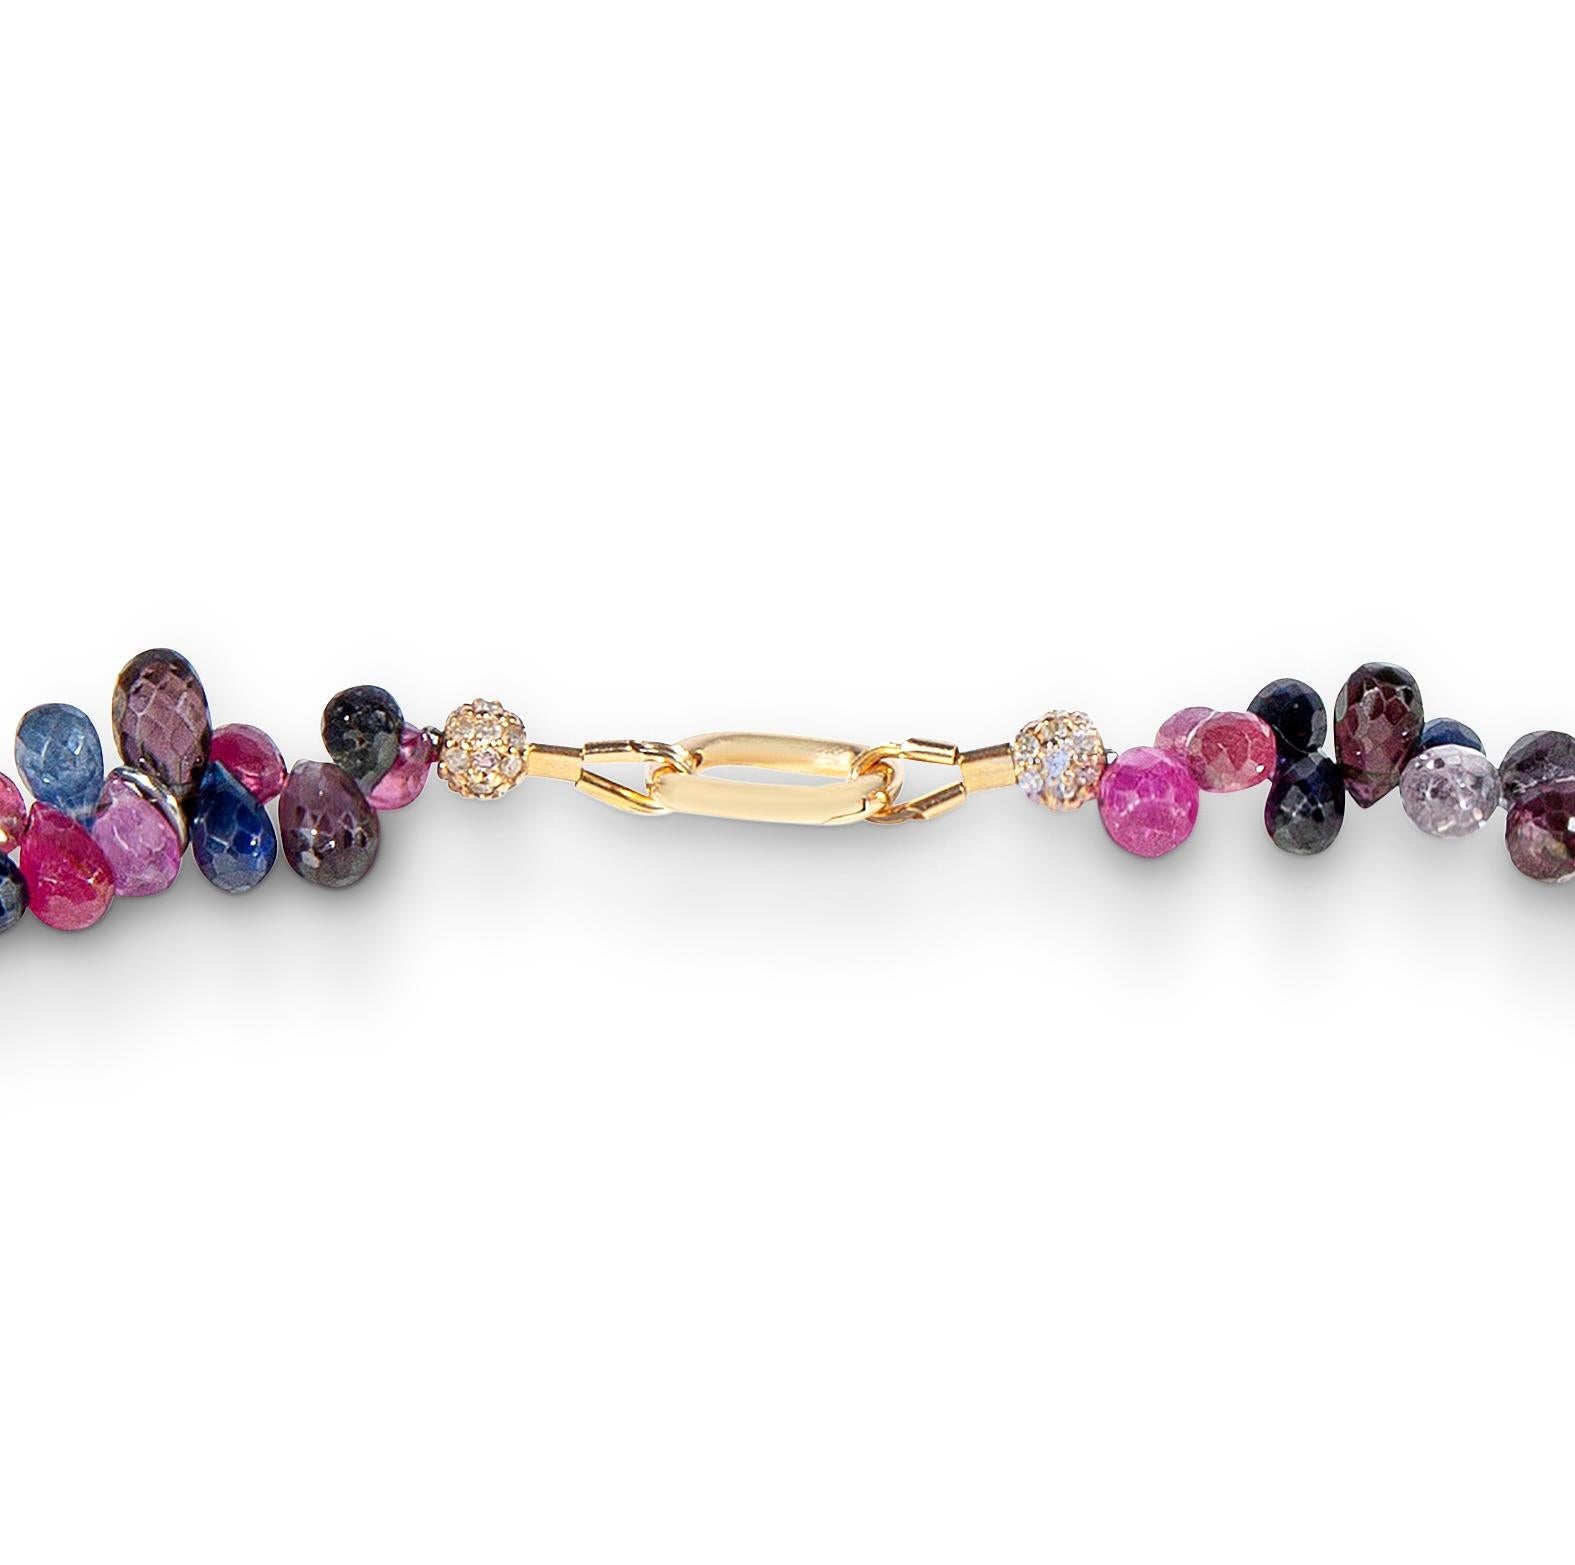 Bead Approx. 170 carat multi color sapphire briolet necklace with 14K gold closure For Sale